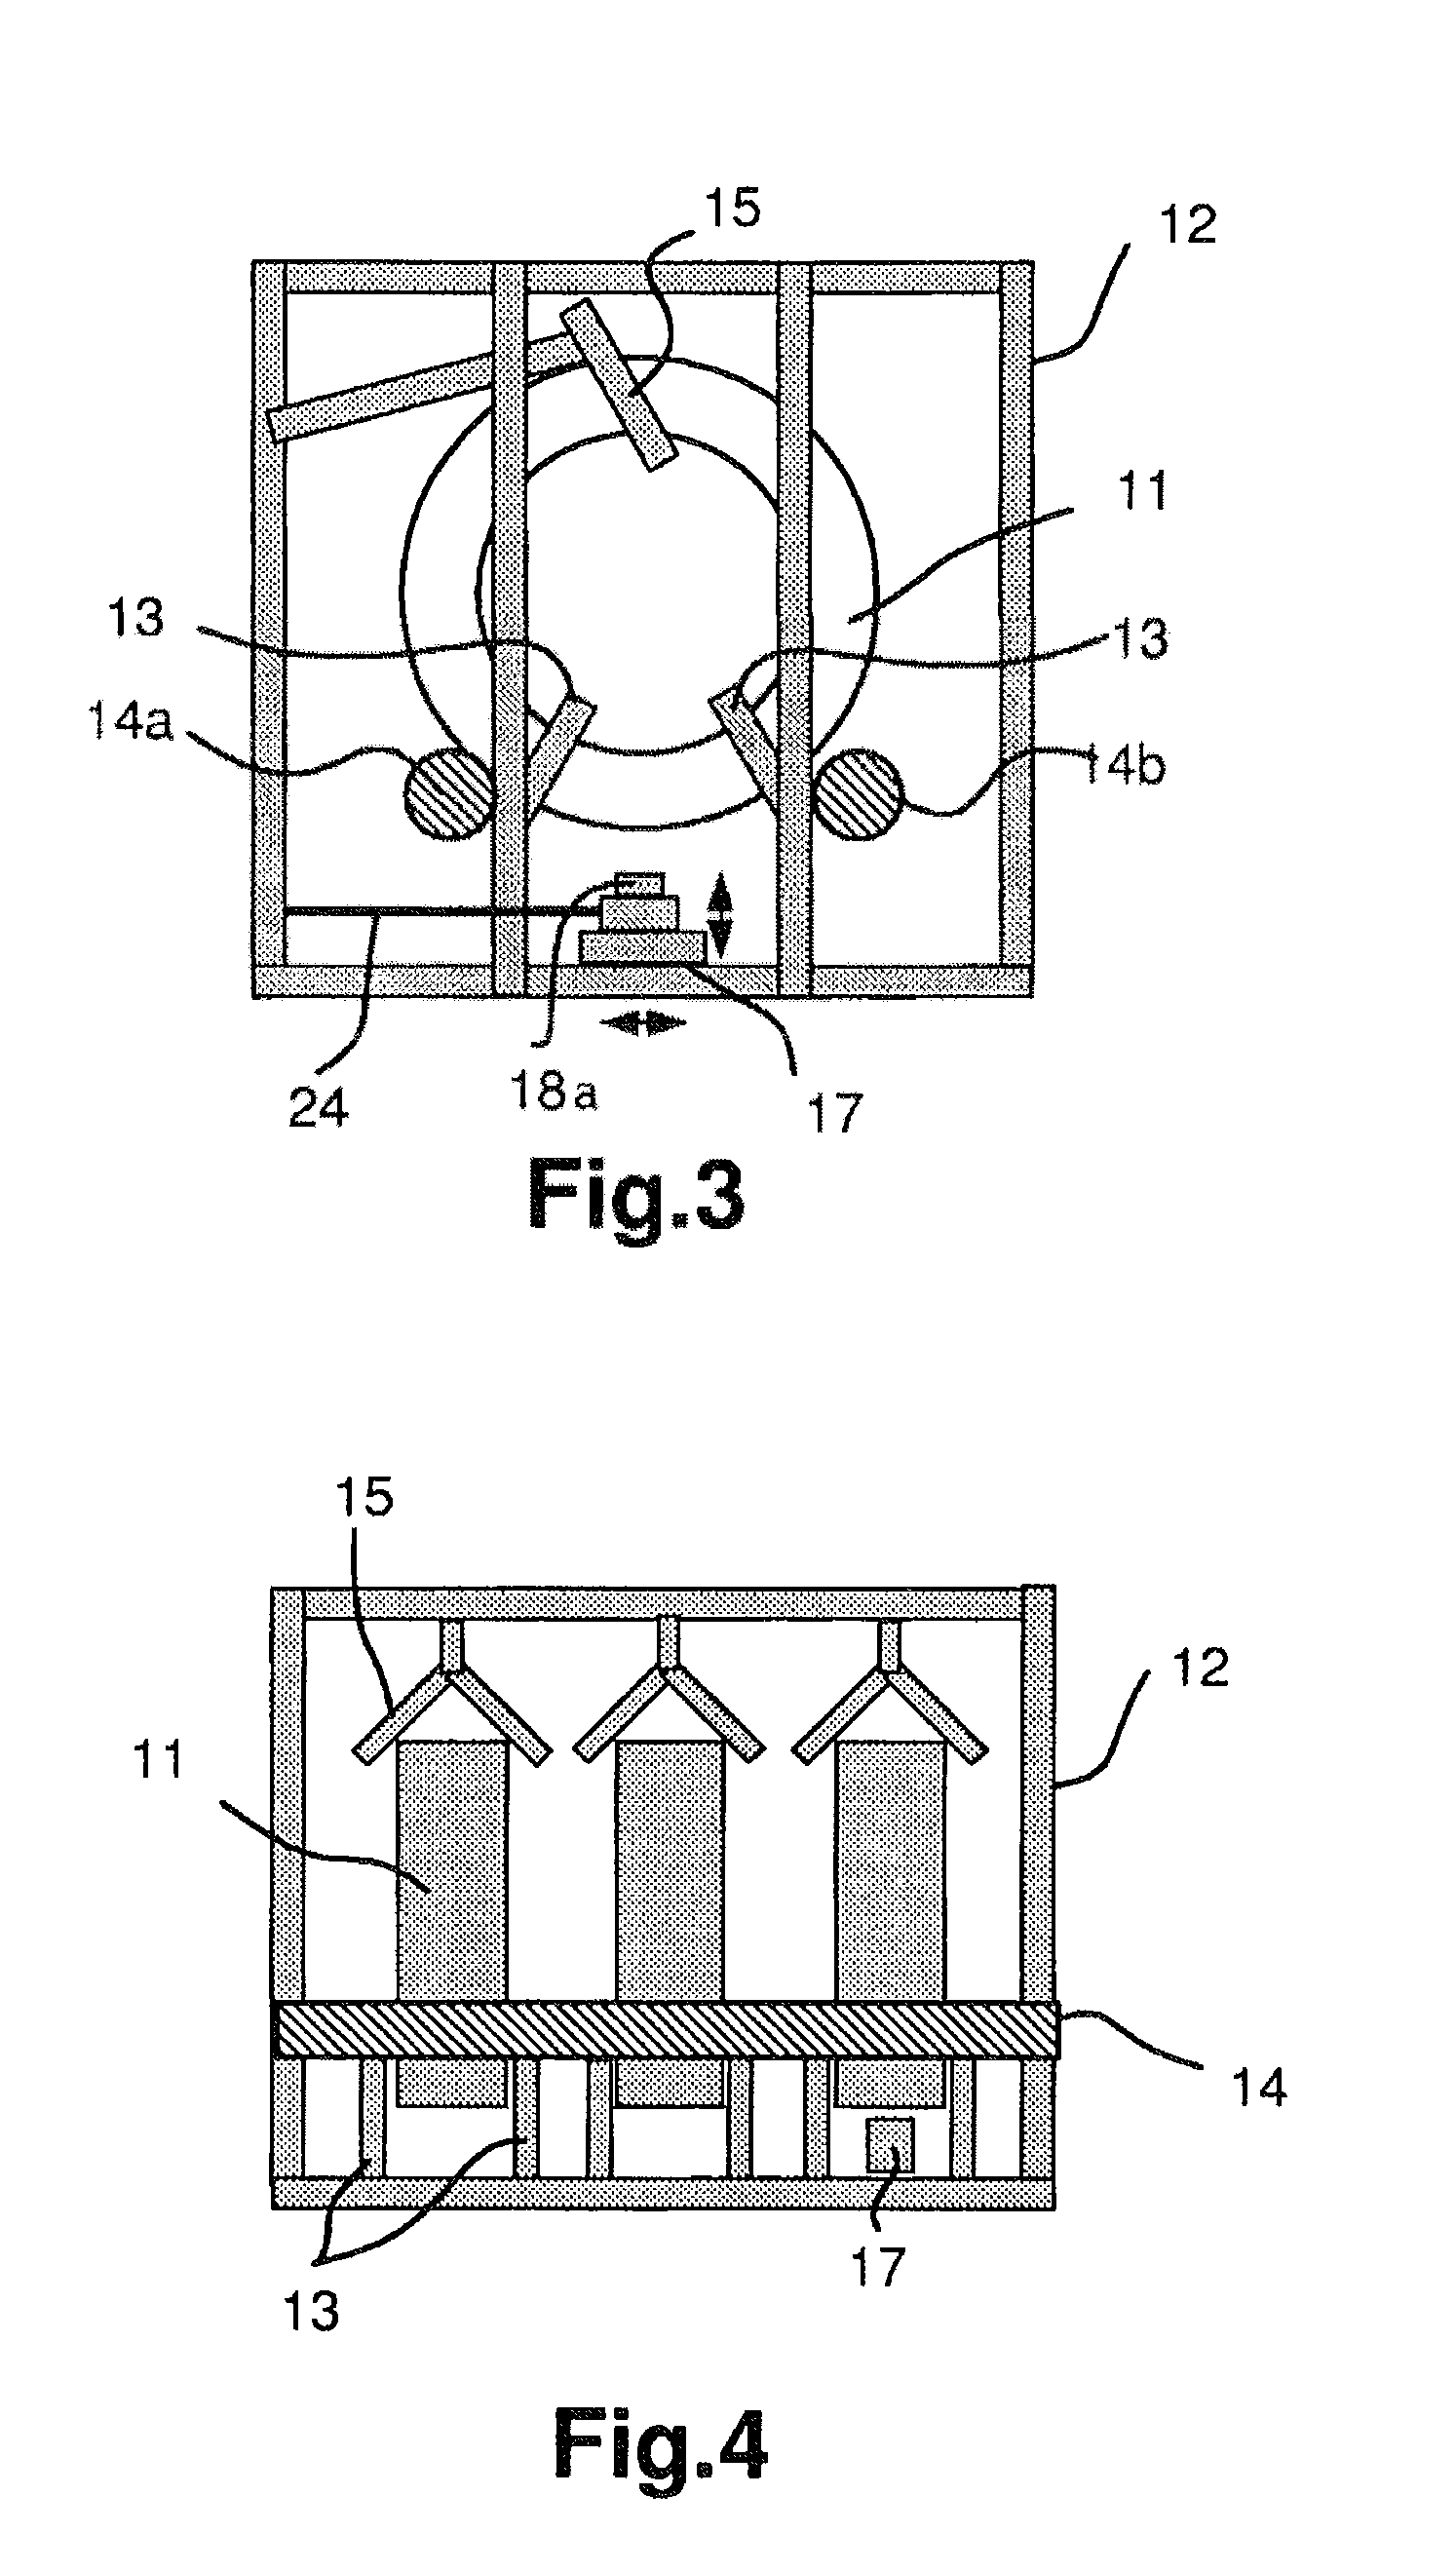 Method and apparatus for automatically analyzing the characteristics of an elastomeric material included in a tire